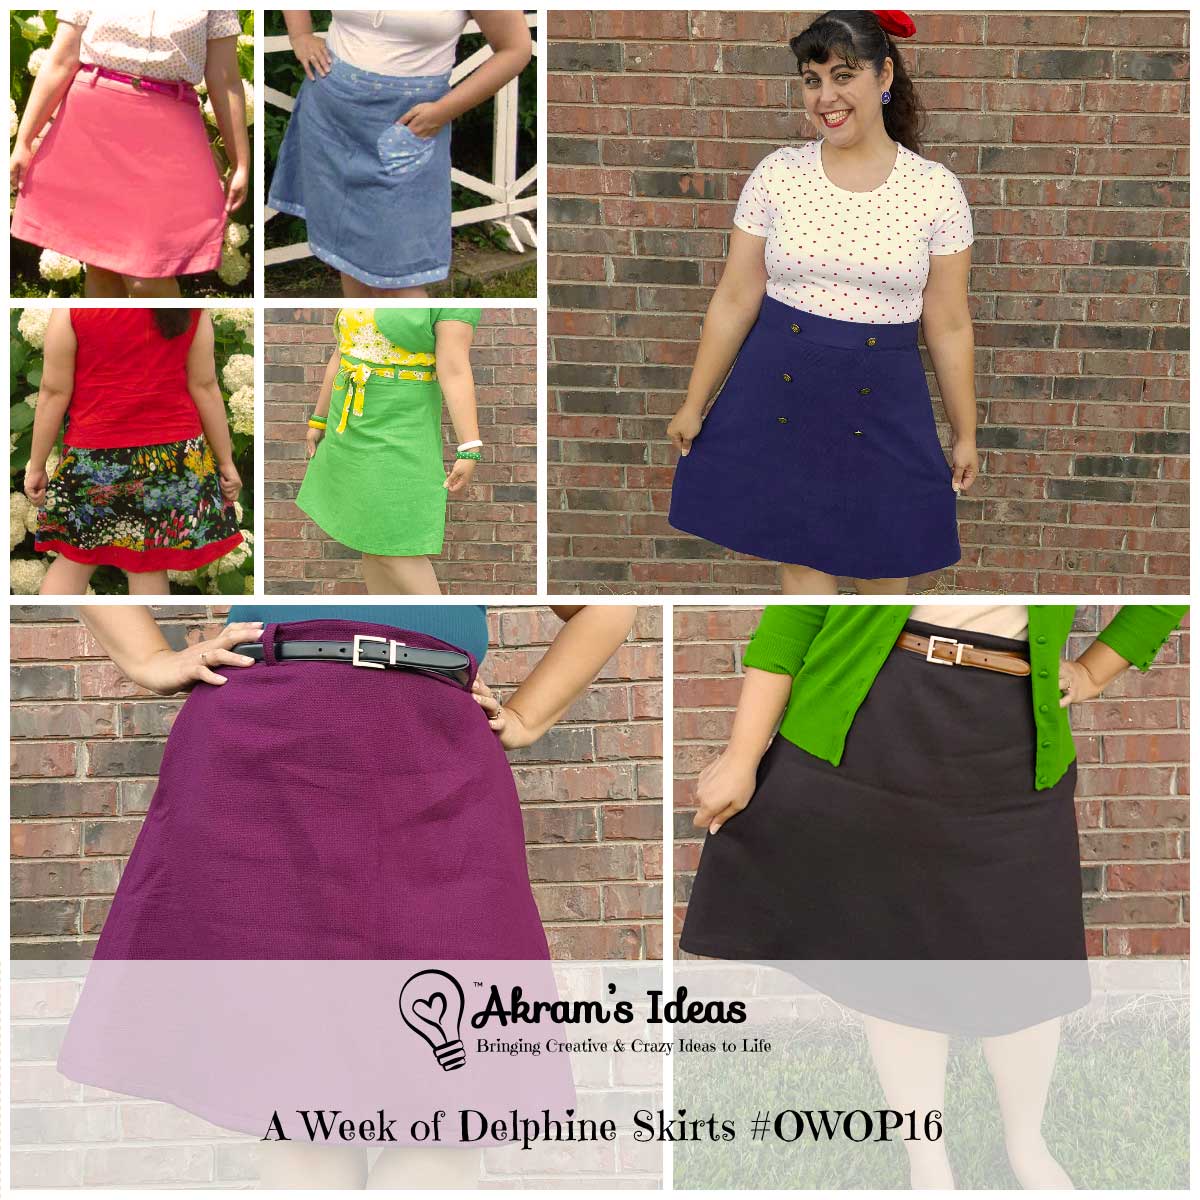 Taking part in #OWOP16 I choose the Delphine Skirt pattern from the book Love at First Stitch by Tilly Walnes.